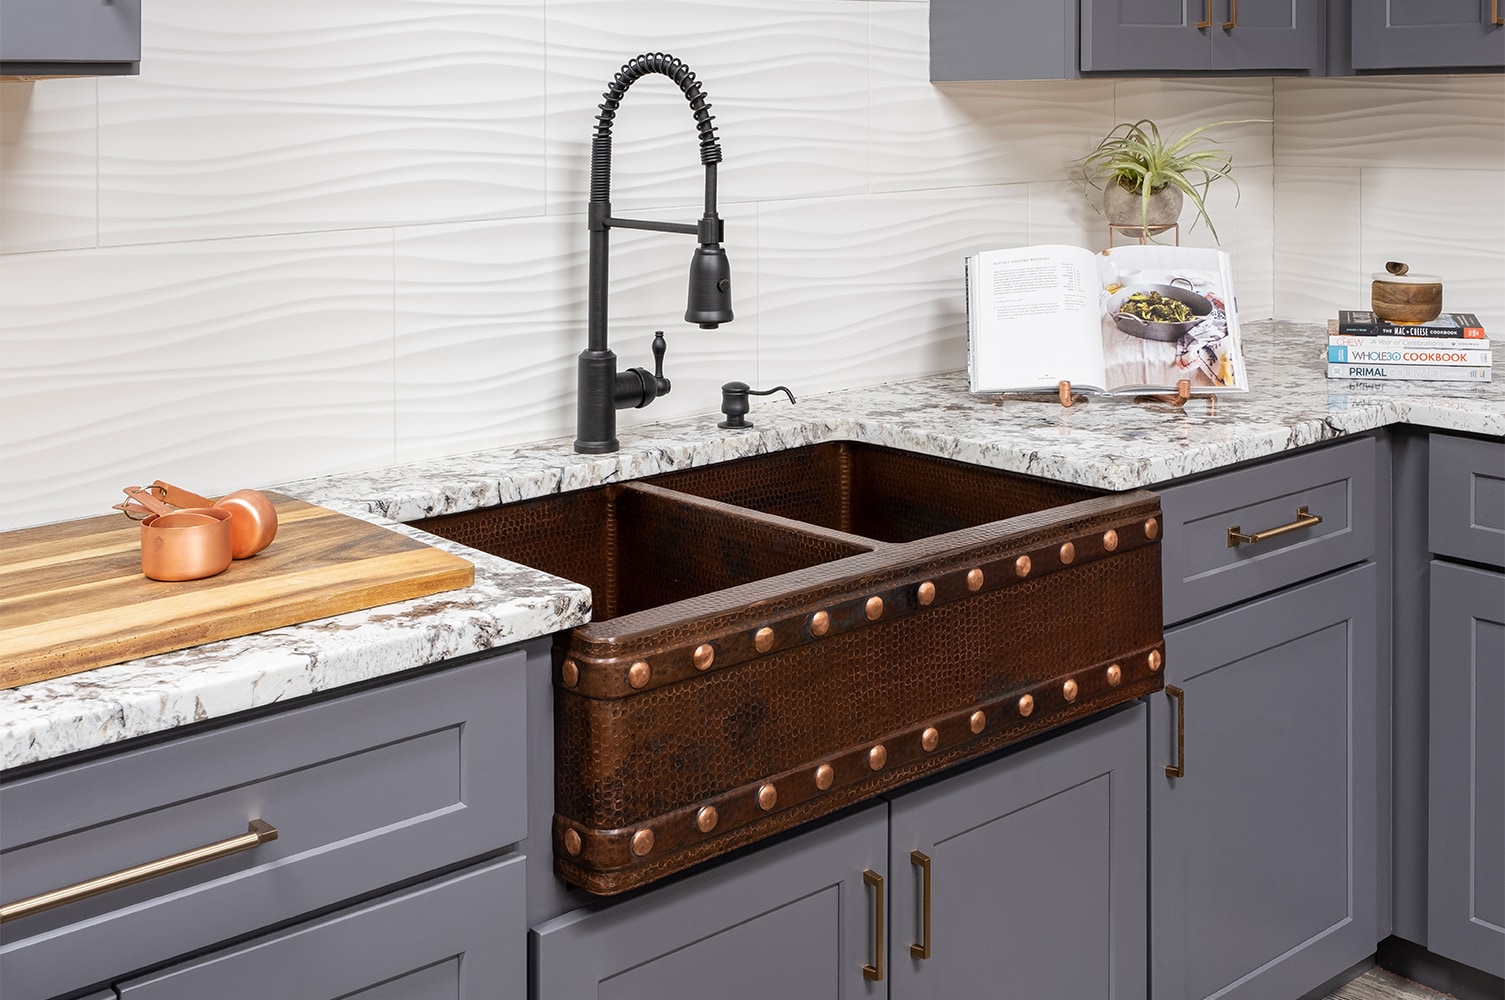 Farmhouse Apron Front 33-in x 22-in Oil Rubbed Bronze Copper Double Equal Bowl Kitchen Sink | - PREMIER COPPER PRODUCTS KA50DB33229BS